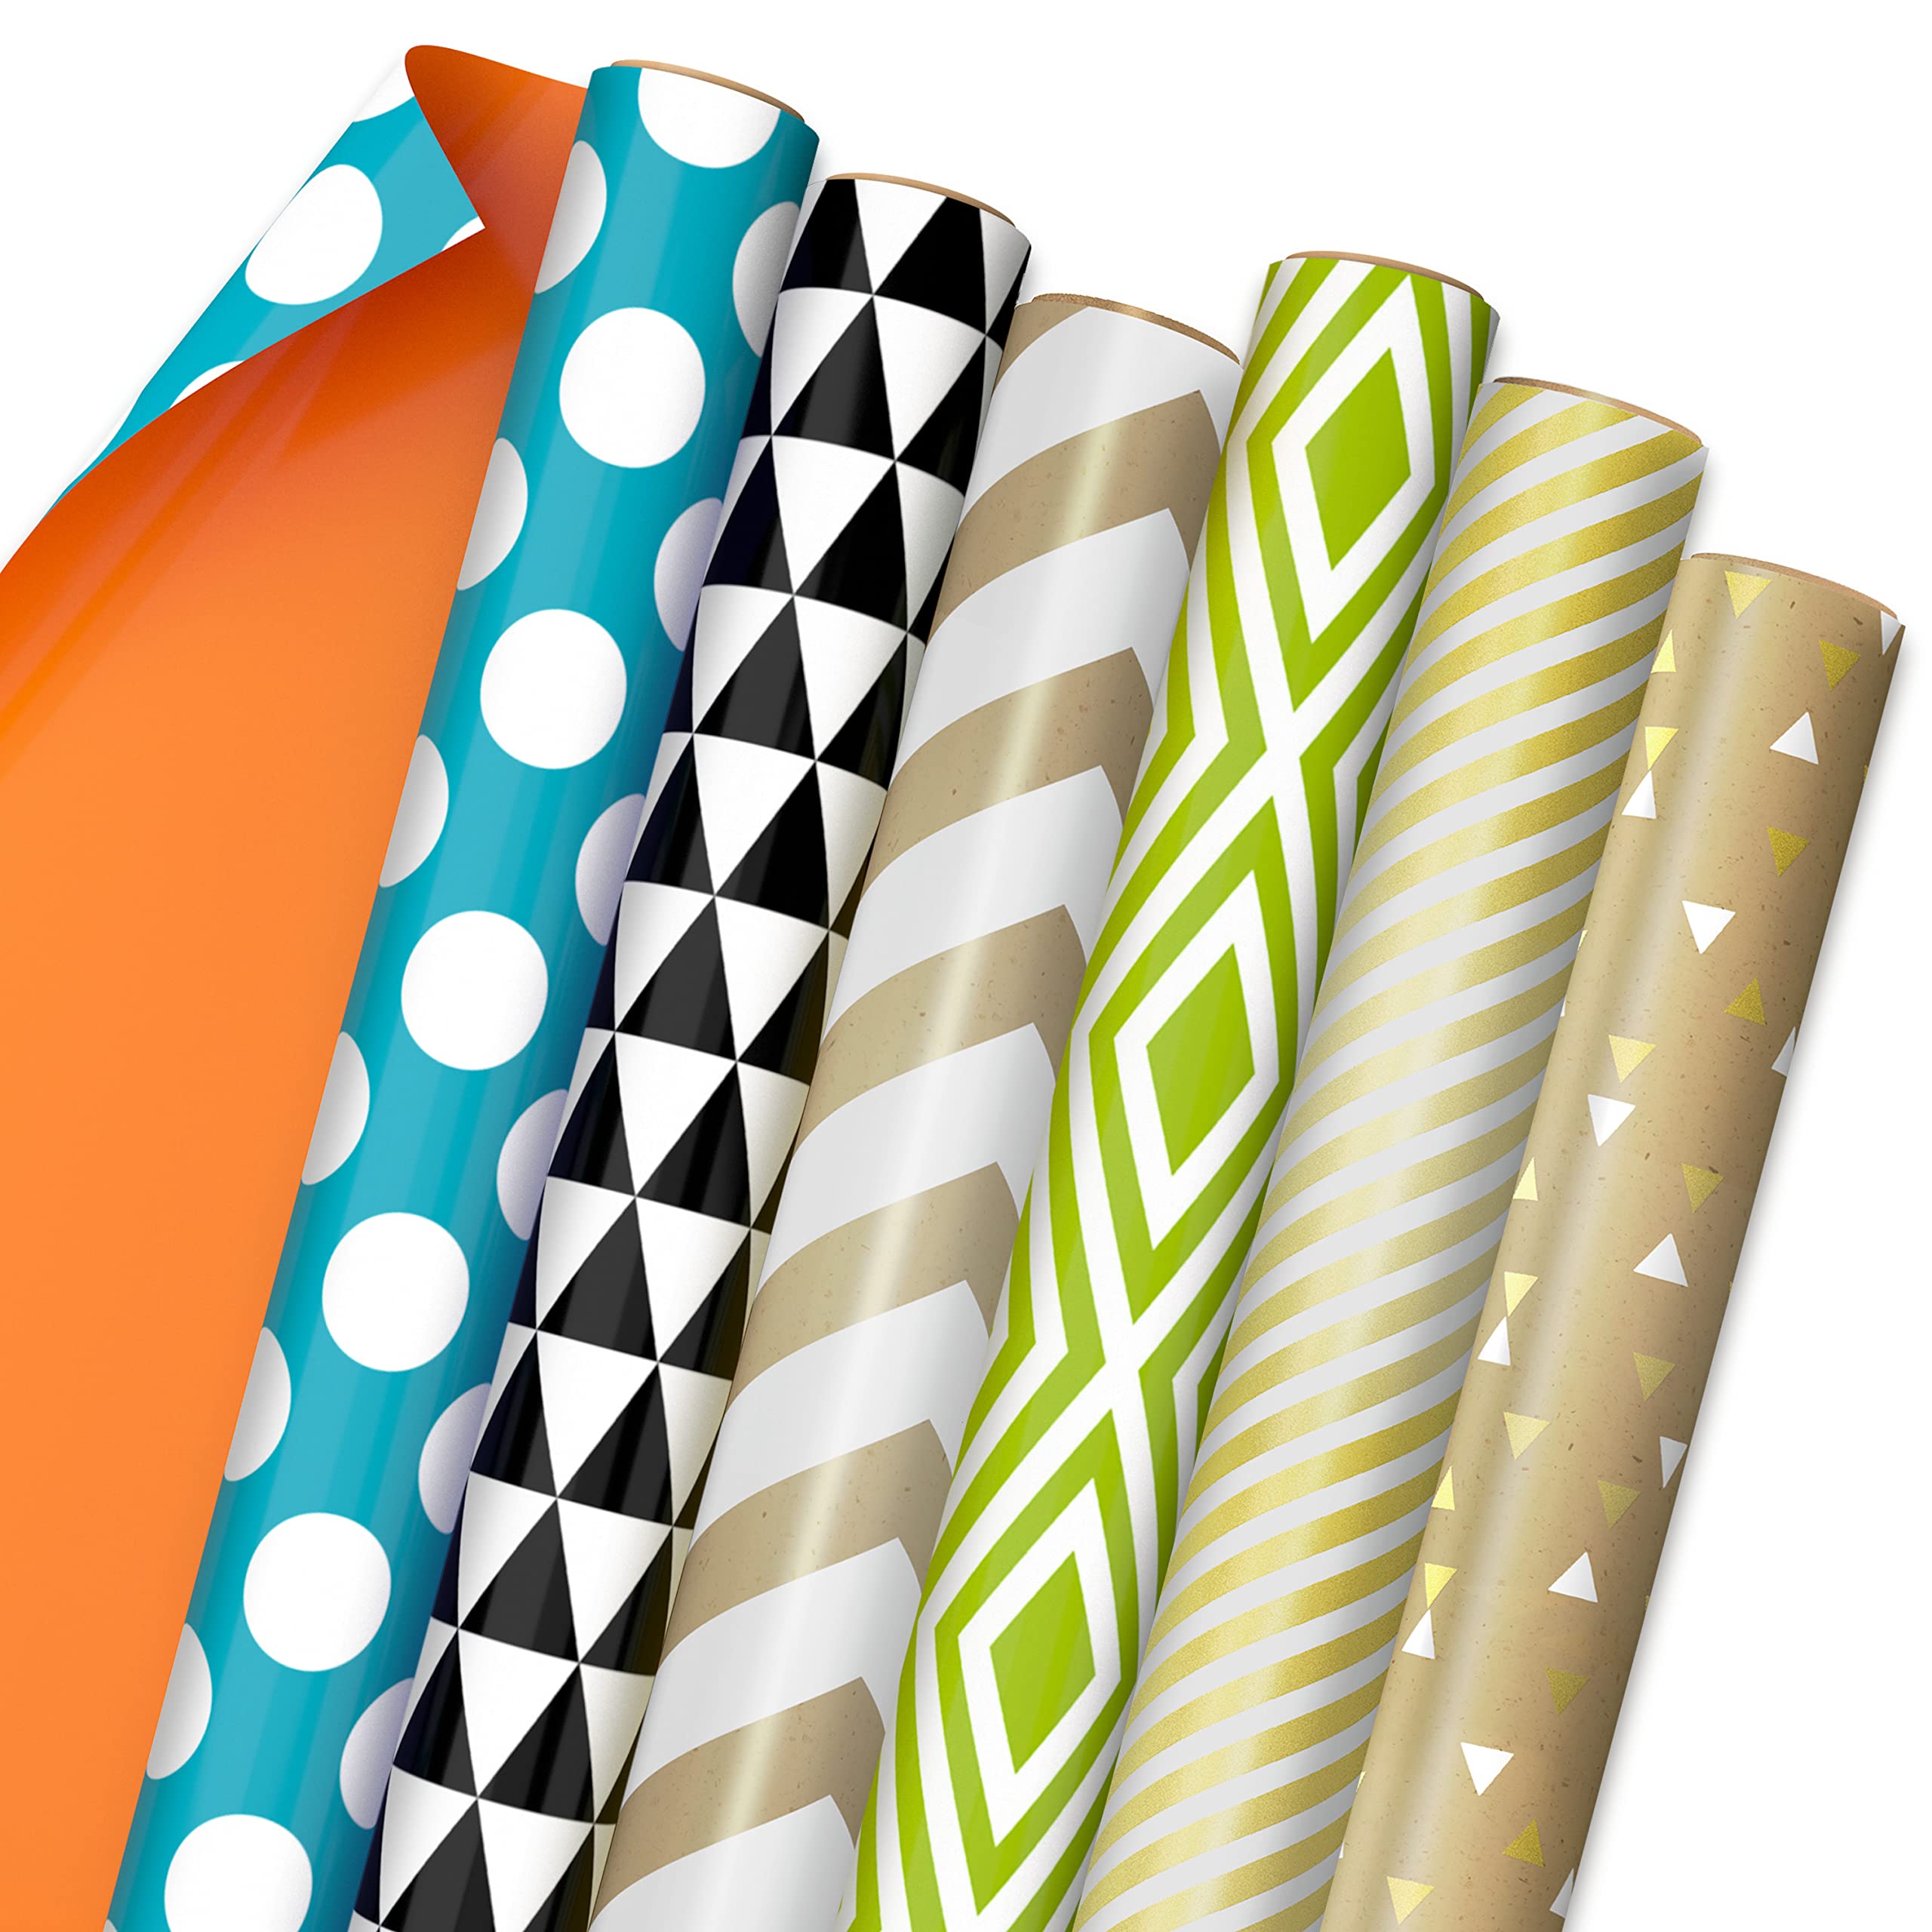 Hallmark Reversible Wrapping Paper Bundle (6 Rolls: 150 Square Feet Total) Stripes, Chevron, Solid, Black & White, Gold, Green, Orange, Blue for Birthdays, Holidays, Any Occasion